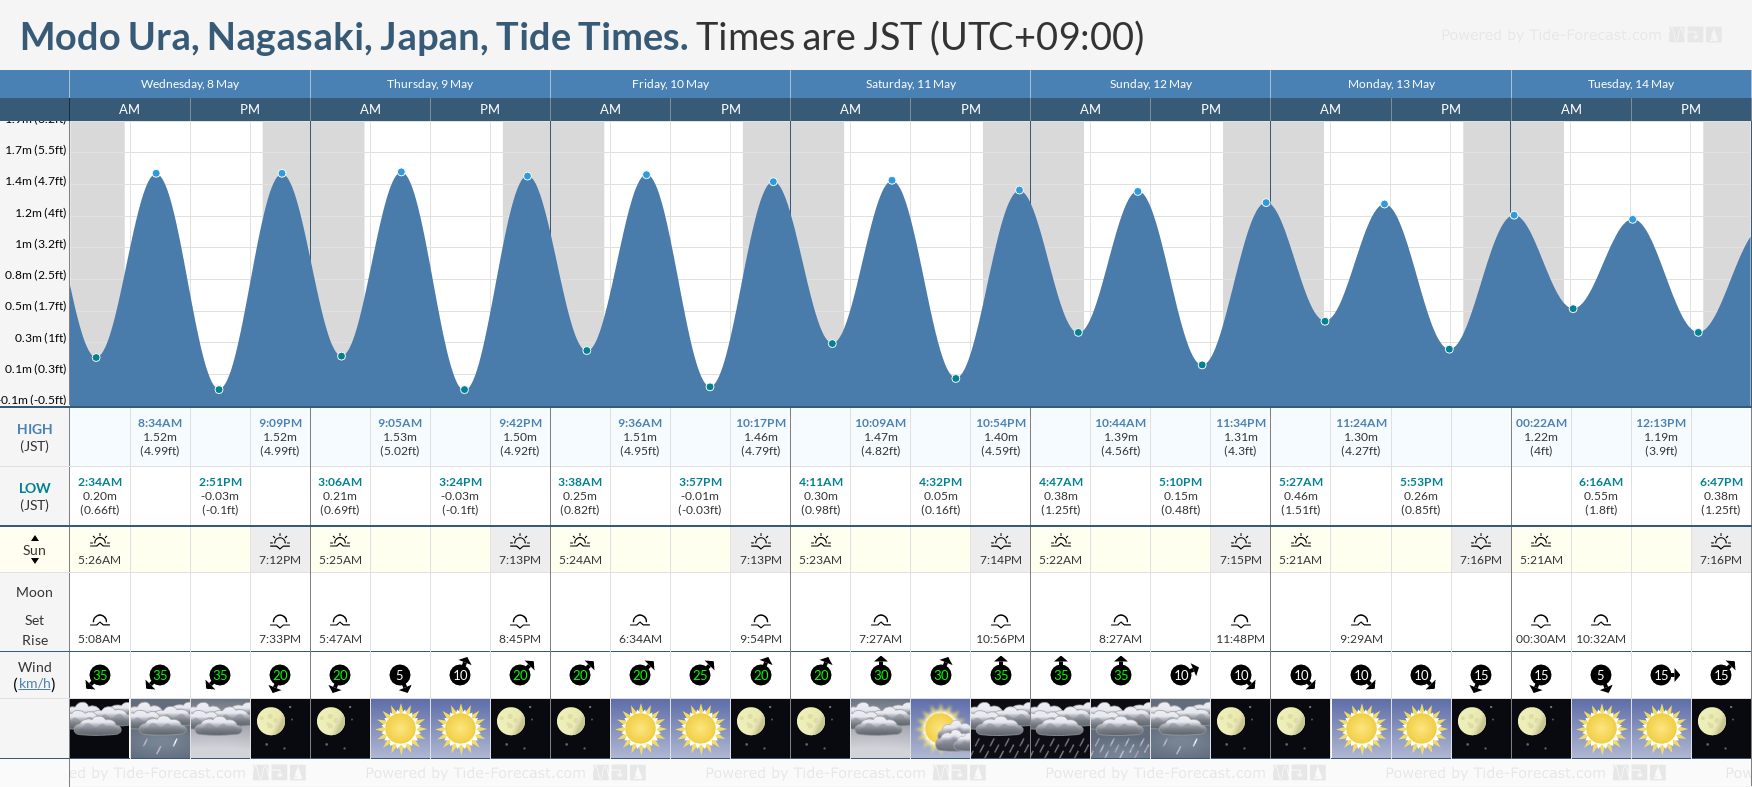 Modo Ura, Nagasaki, Japan Tide Chart including high and low tide times for the next 7 days